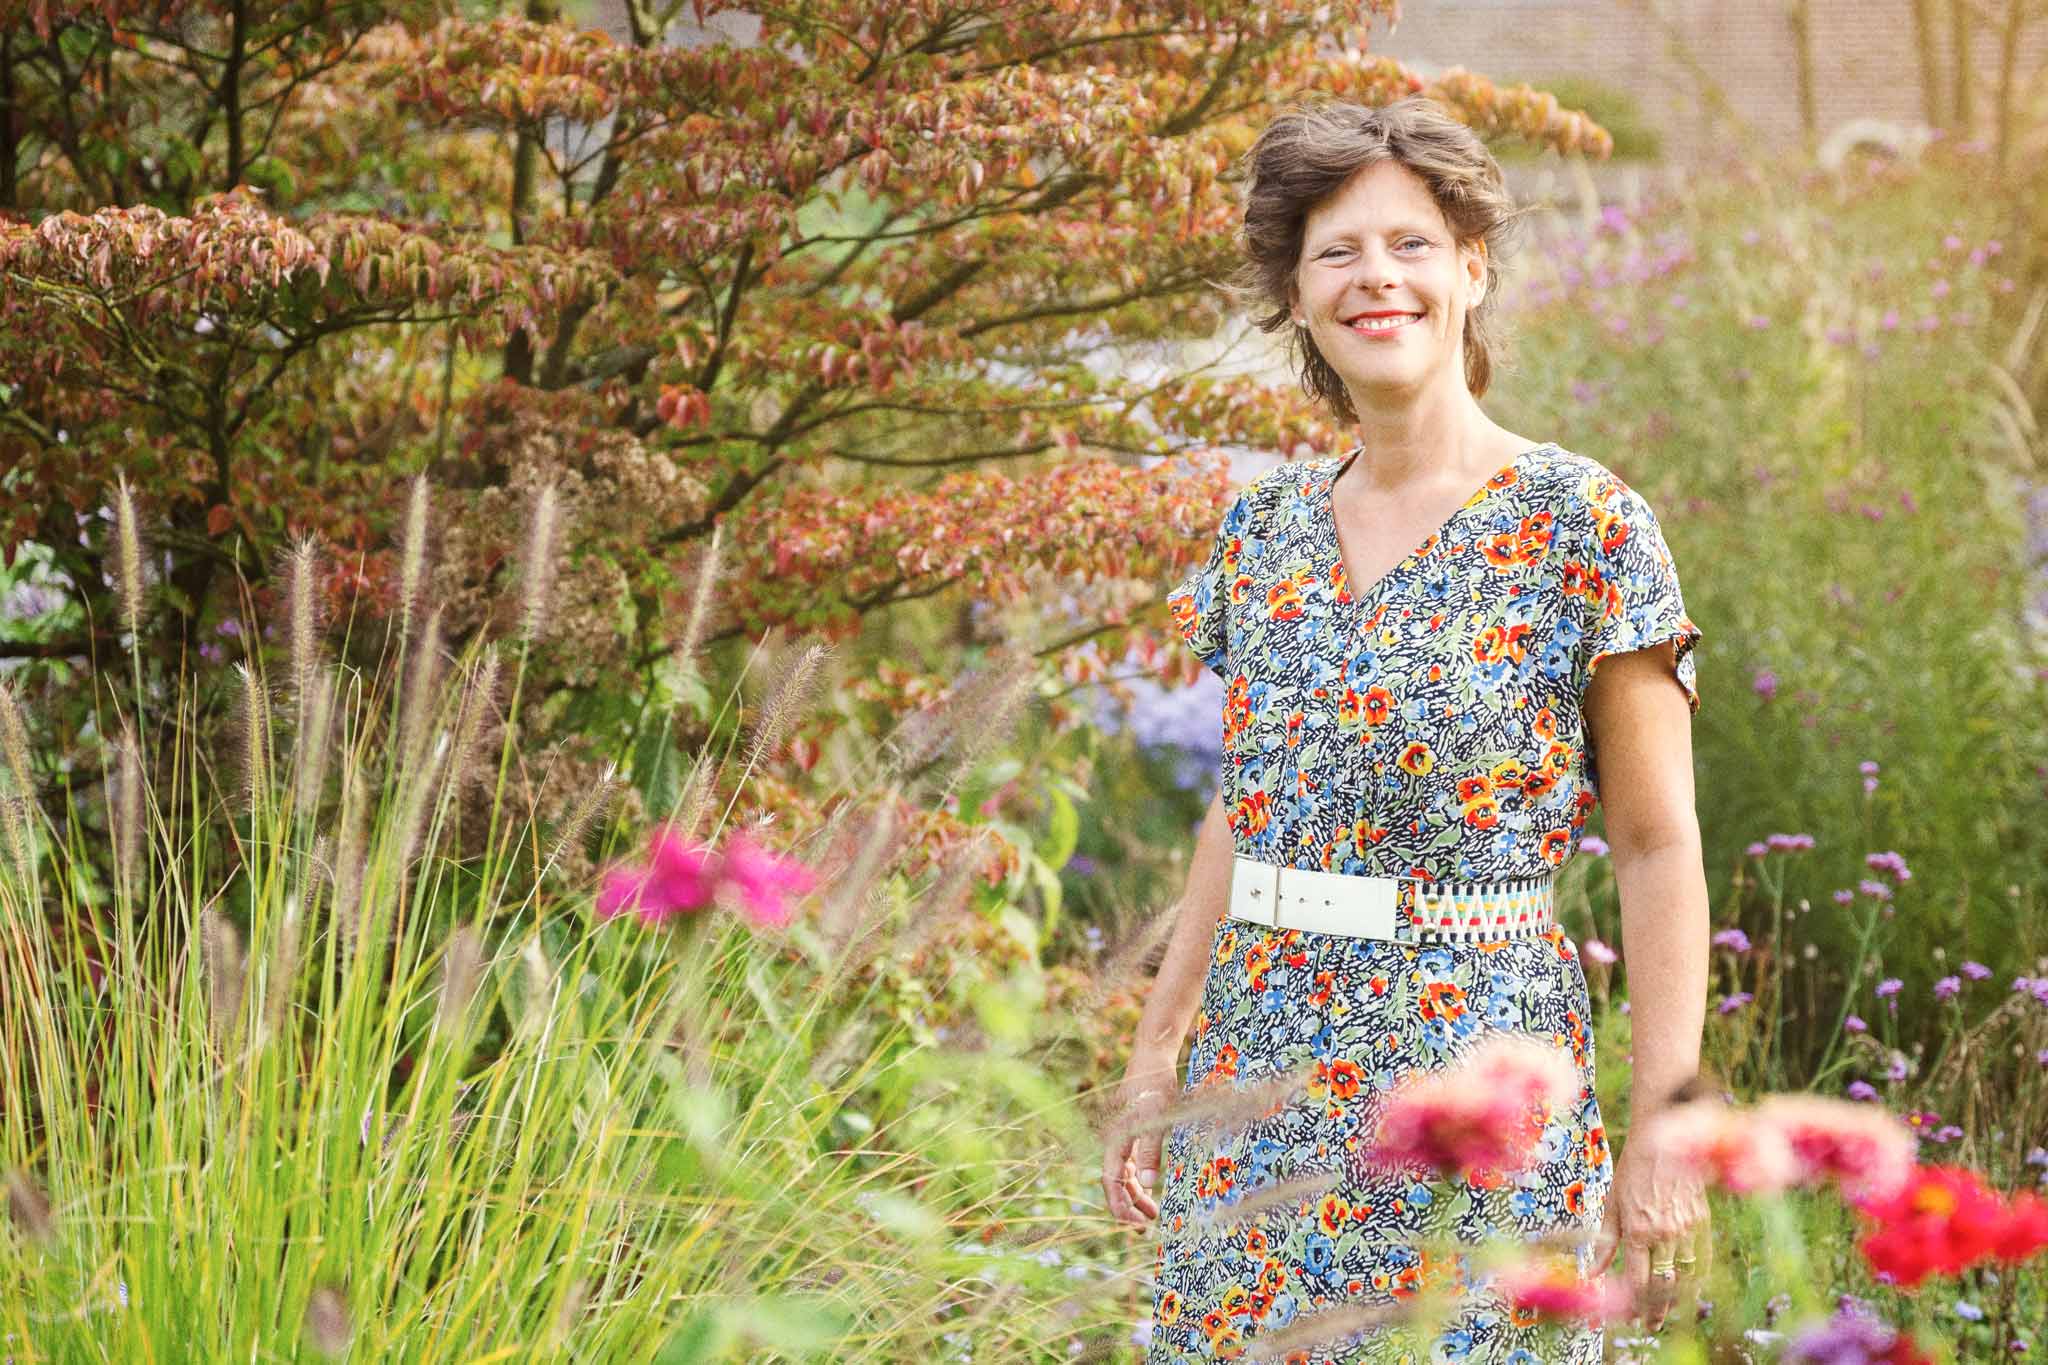 Exterior photo of a smiling Carina Weijma standing among flowers in a luscious park.